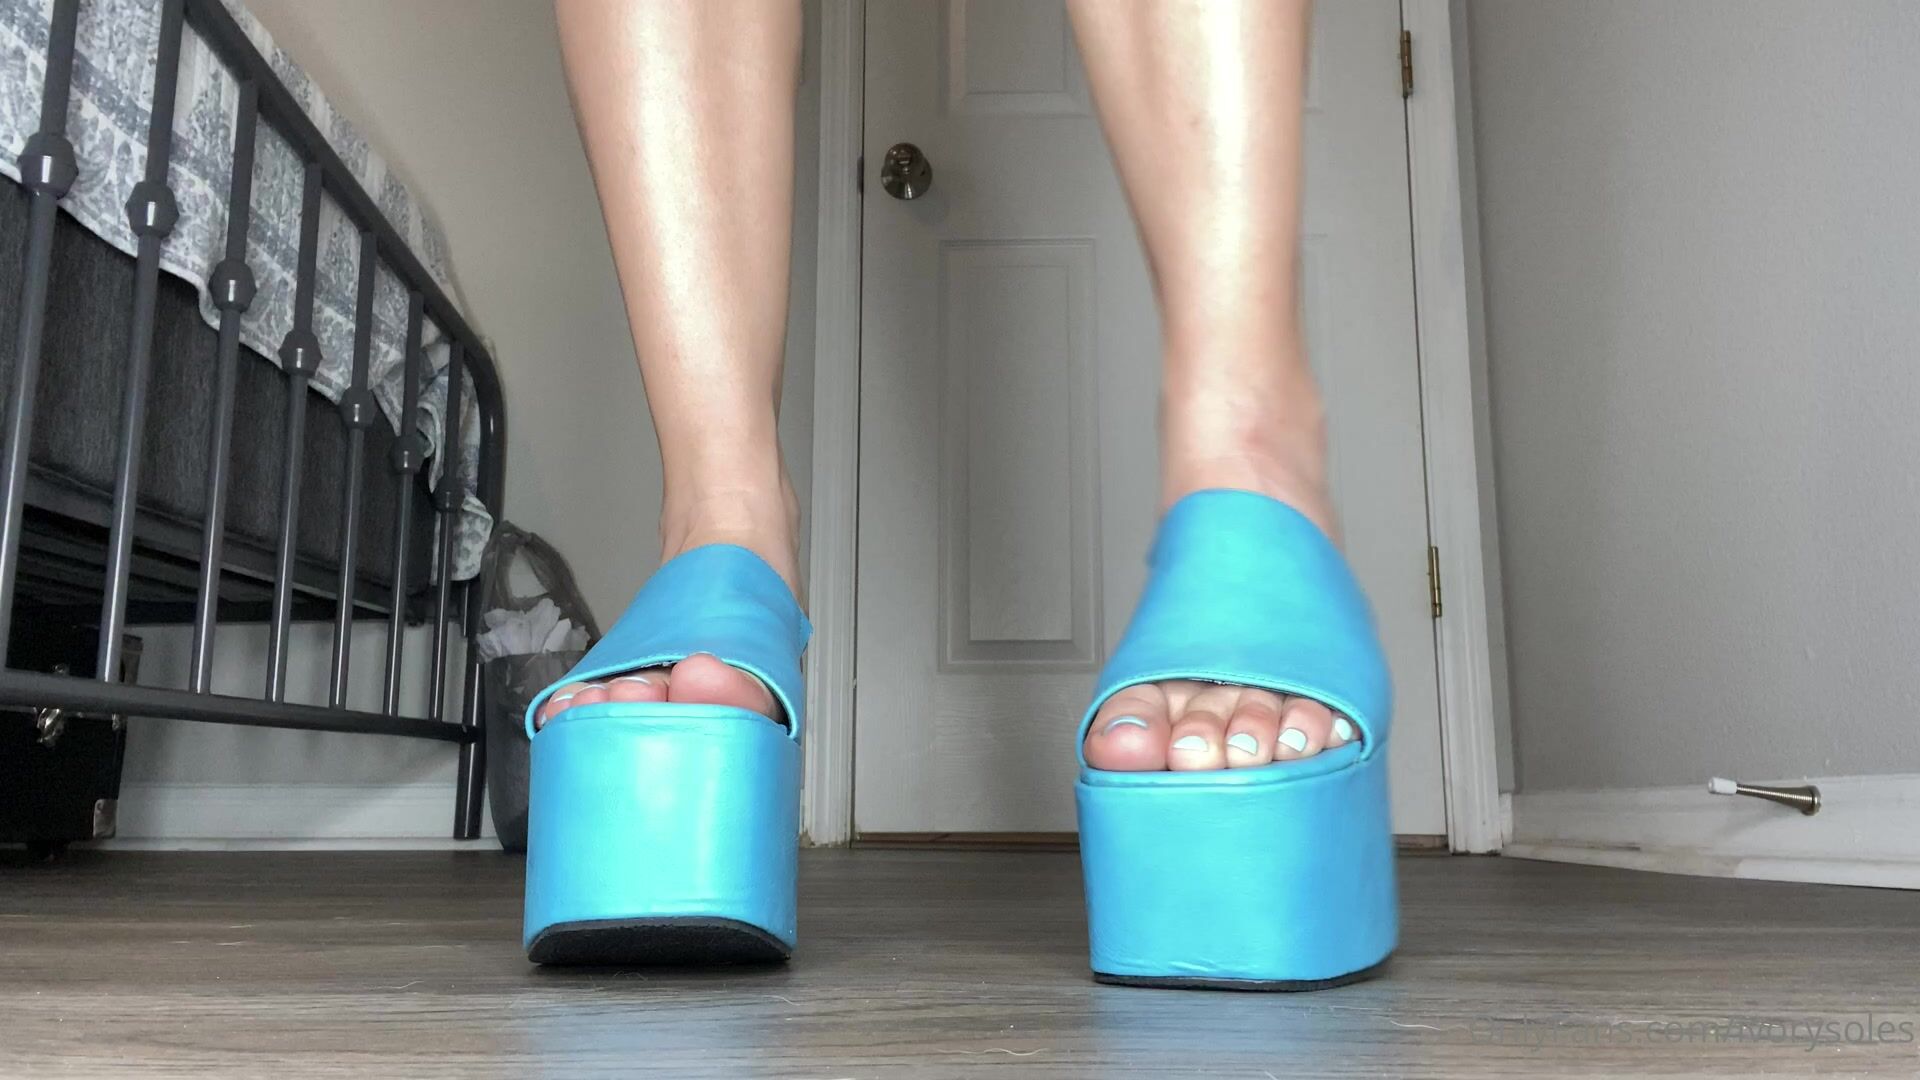 Watch Online Ivory Soles Aka Ivorysoles Onlyfans I Have A Feeling These Wedges Are Going To Be